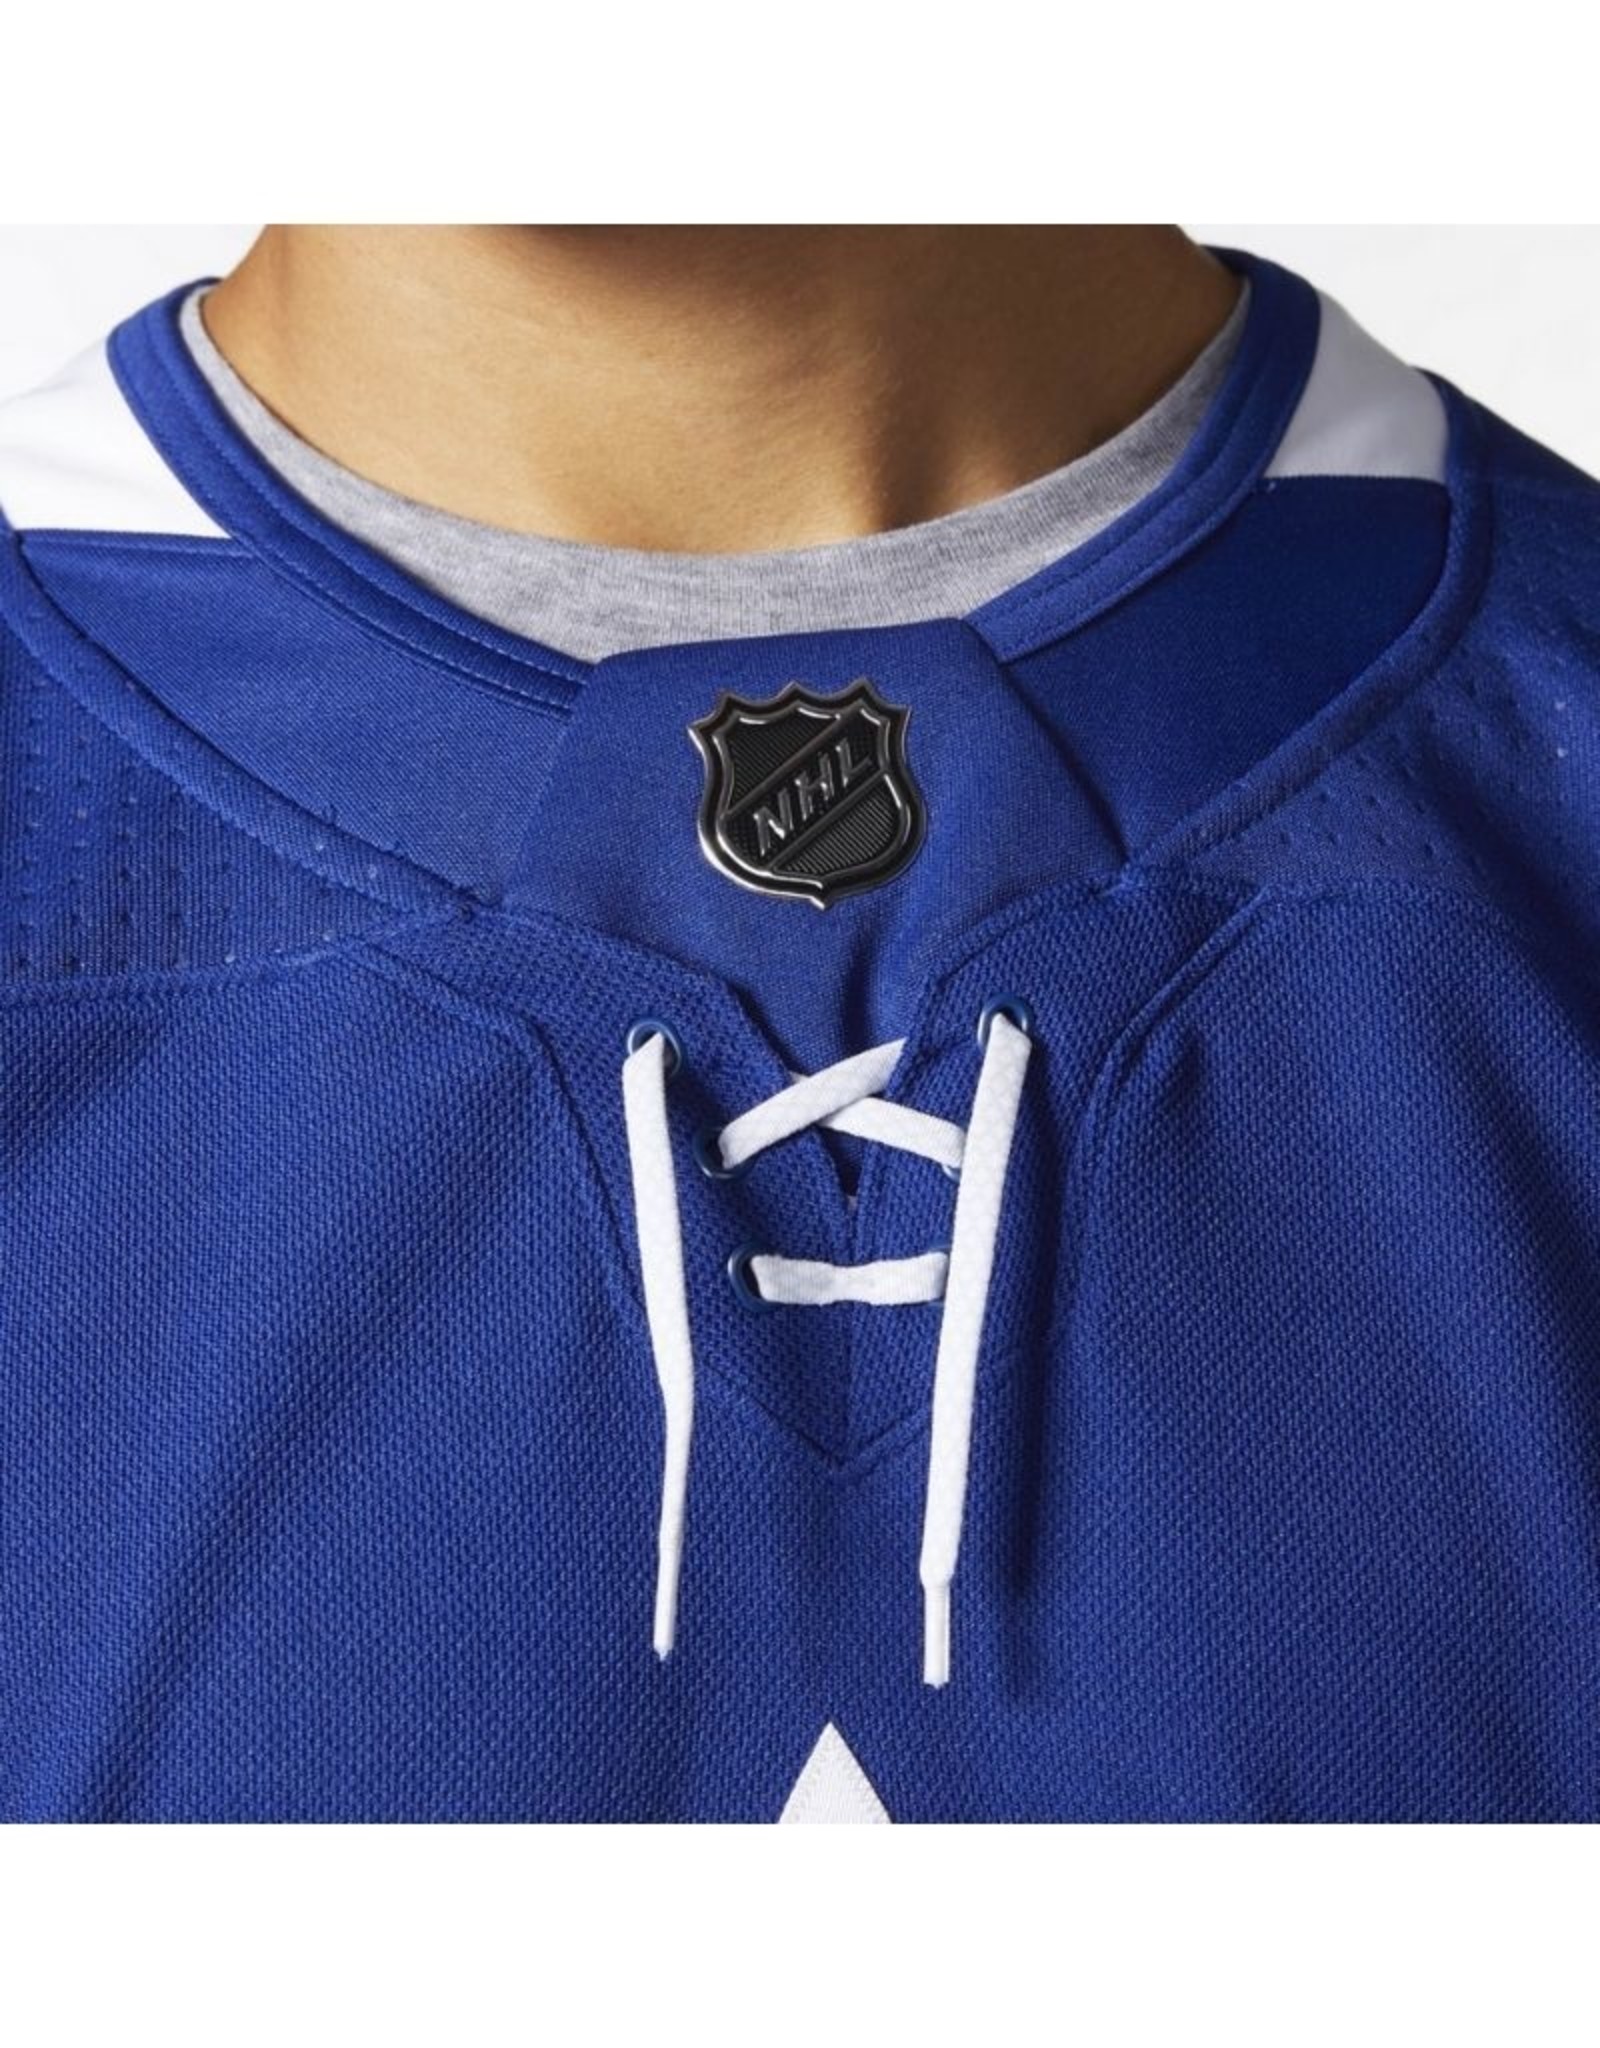 Adidas Adult Authentic Toronto Maple Leafs Jersey Blue - THAT PRO LOOK